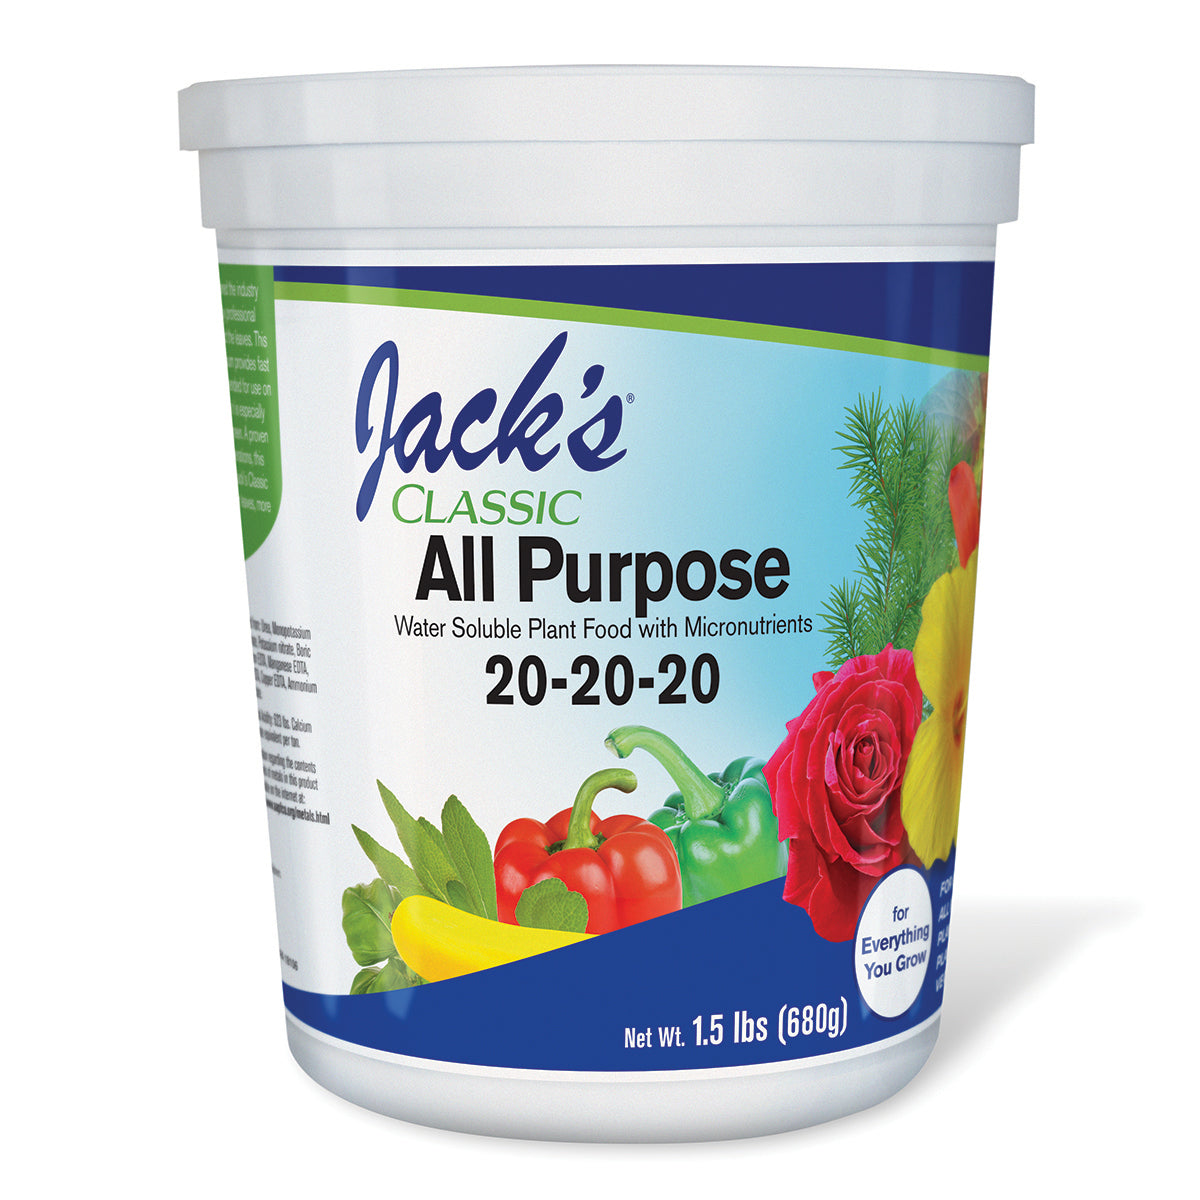 Product Secondary Image:Jack's Classic All Purpose 20-20-20